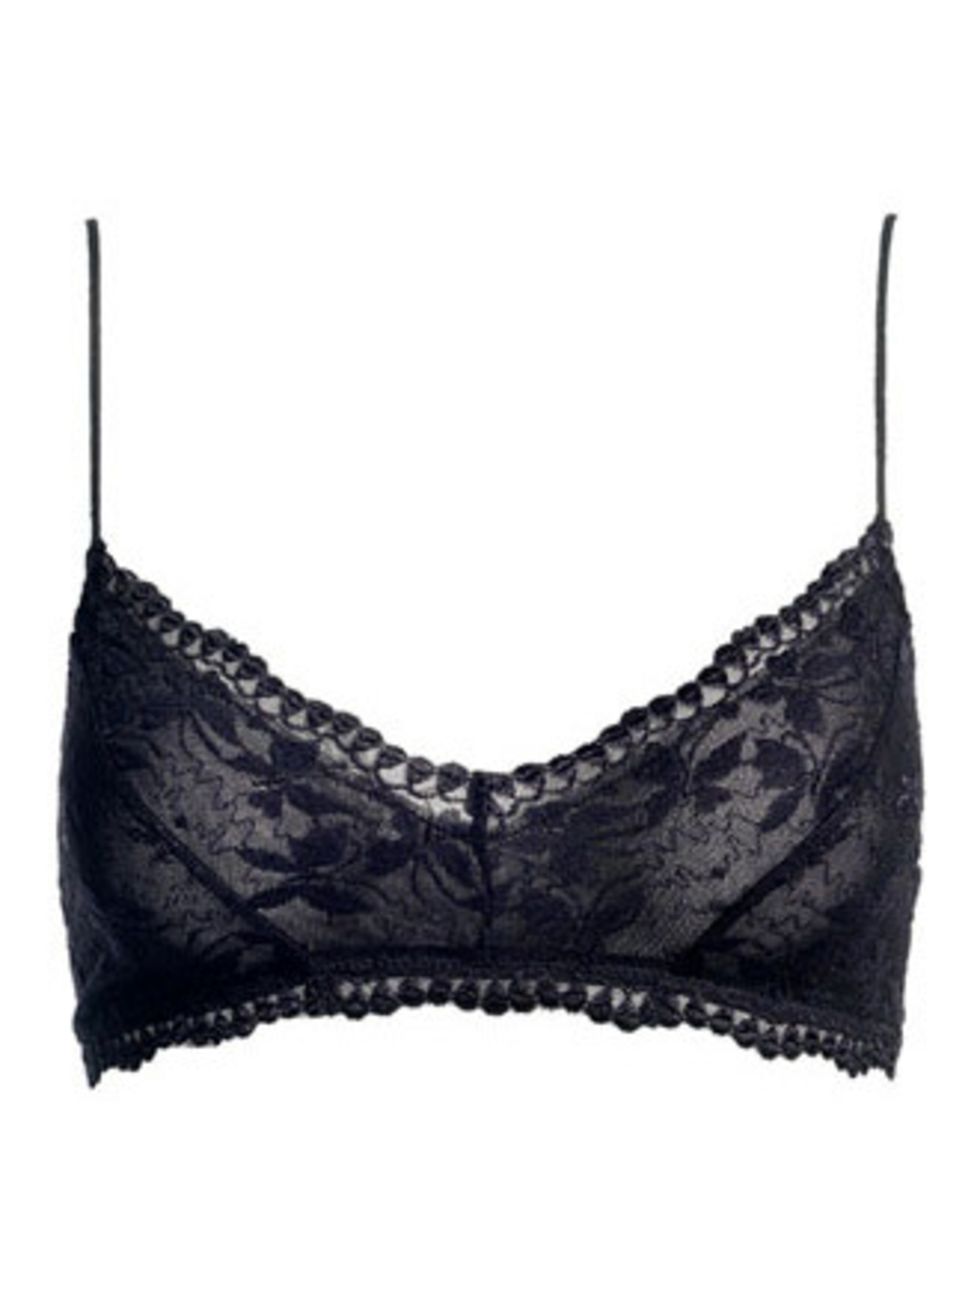 <p>This bra is too pretty to hide. Wear it under a loose, low-cut vest at weekends. Just make sure you keep the rest of your outfit low-key  no heels allowed.</p><p>Lace bra, £14 by <a href="http://www.monsoon.co.uk/NEW-Arrivals/Butterfly-Lace-Bra/invt/7